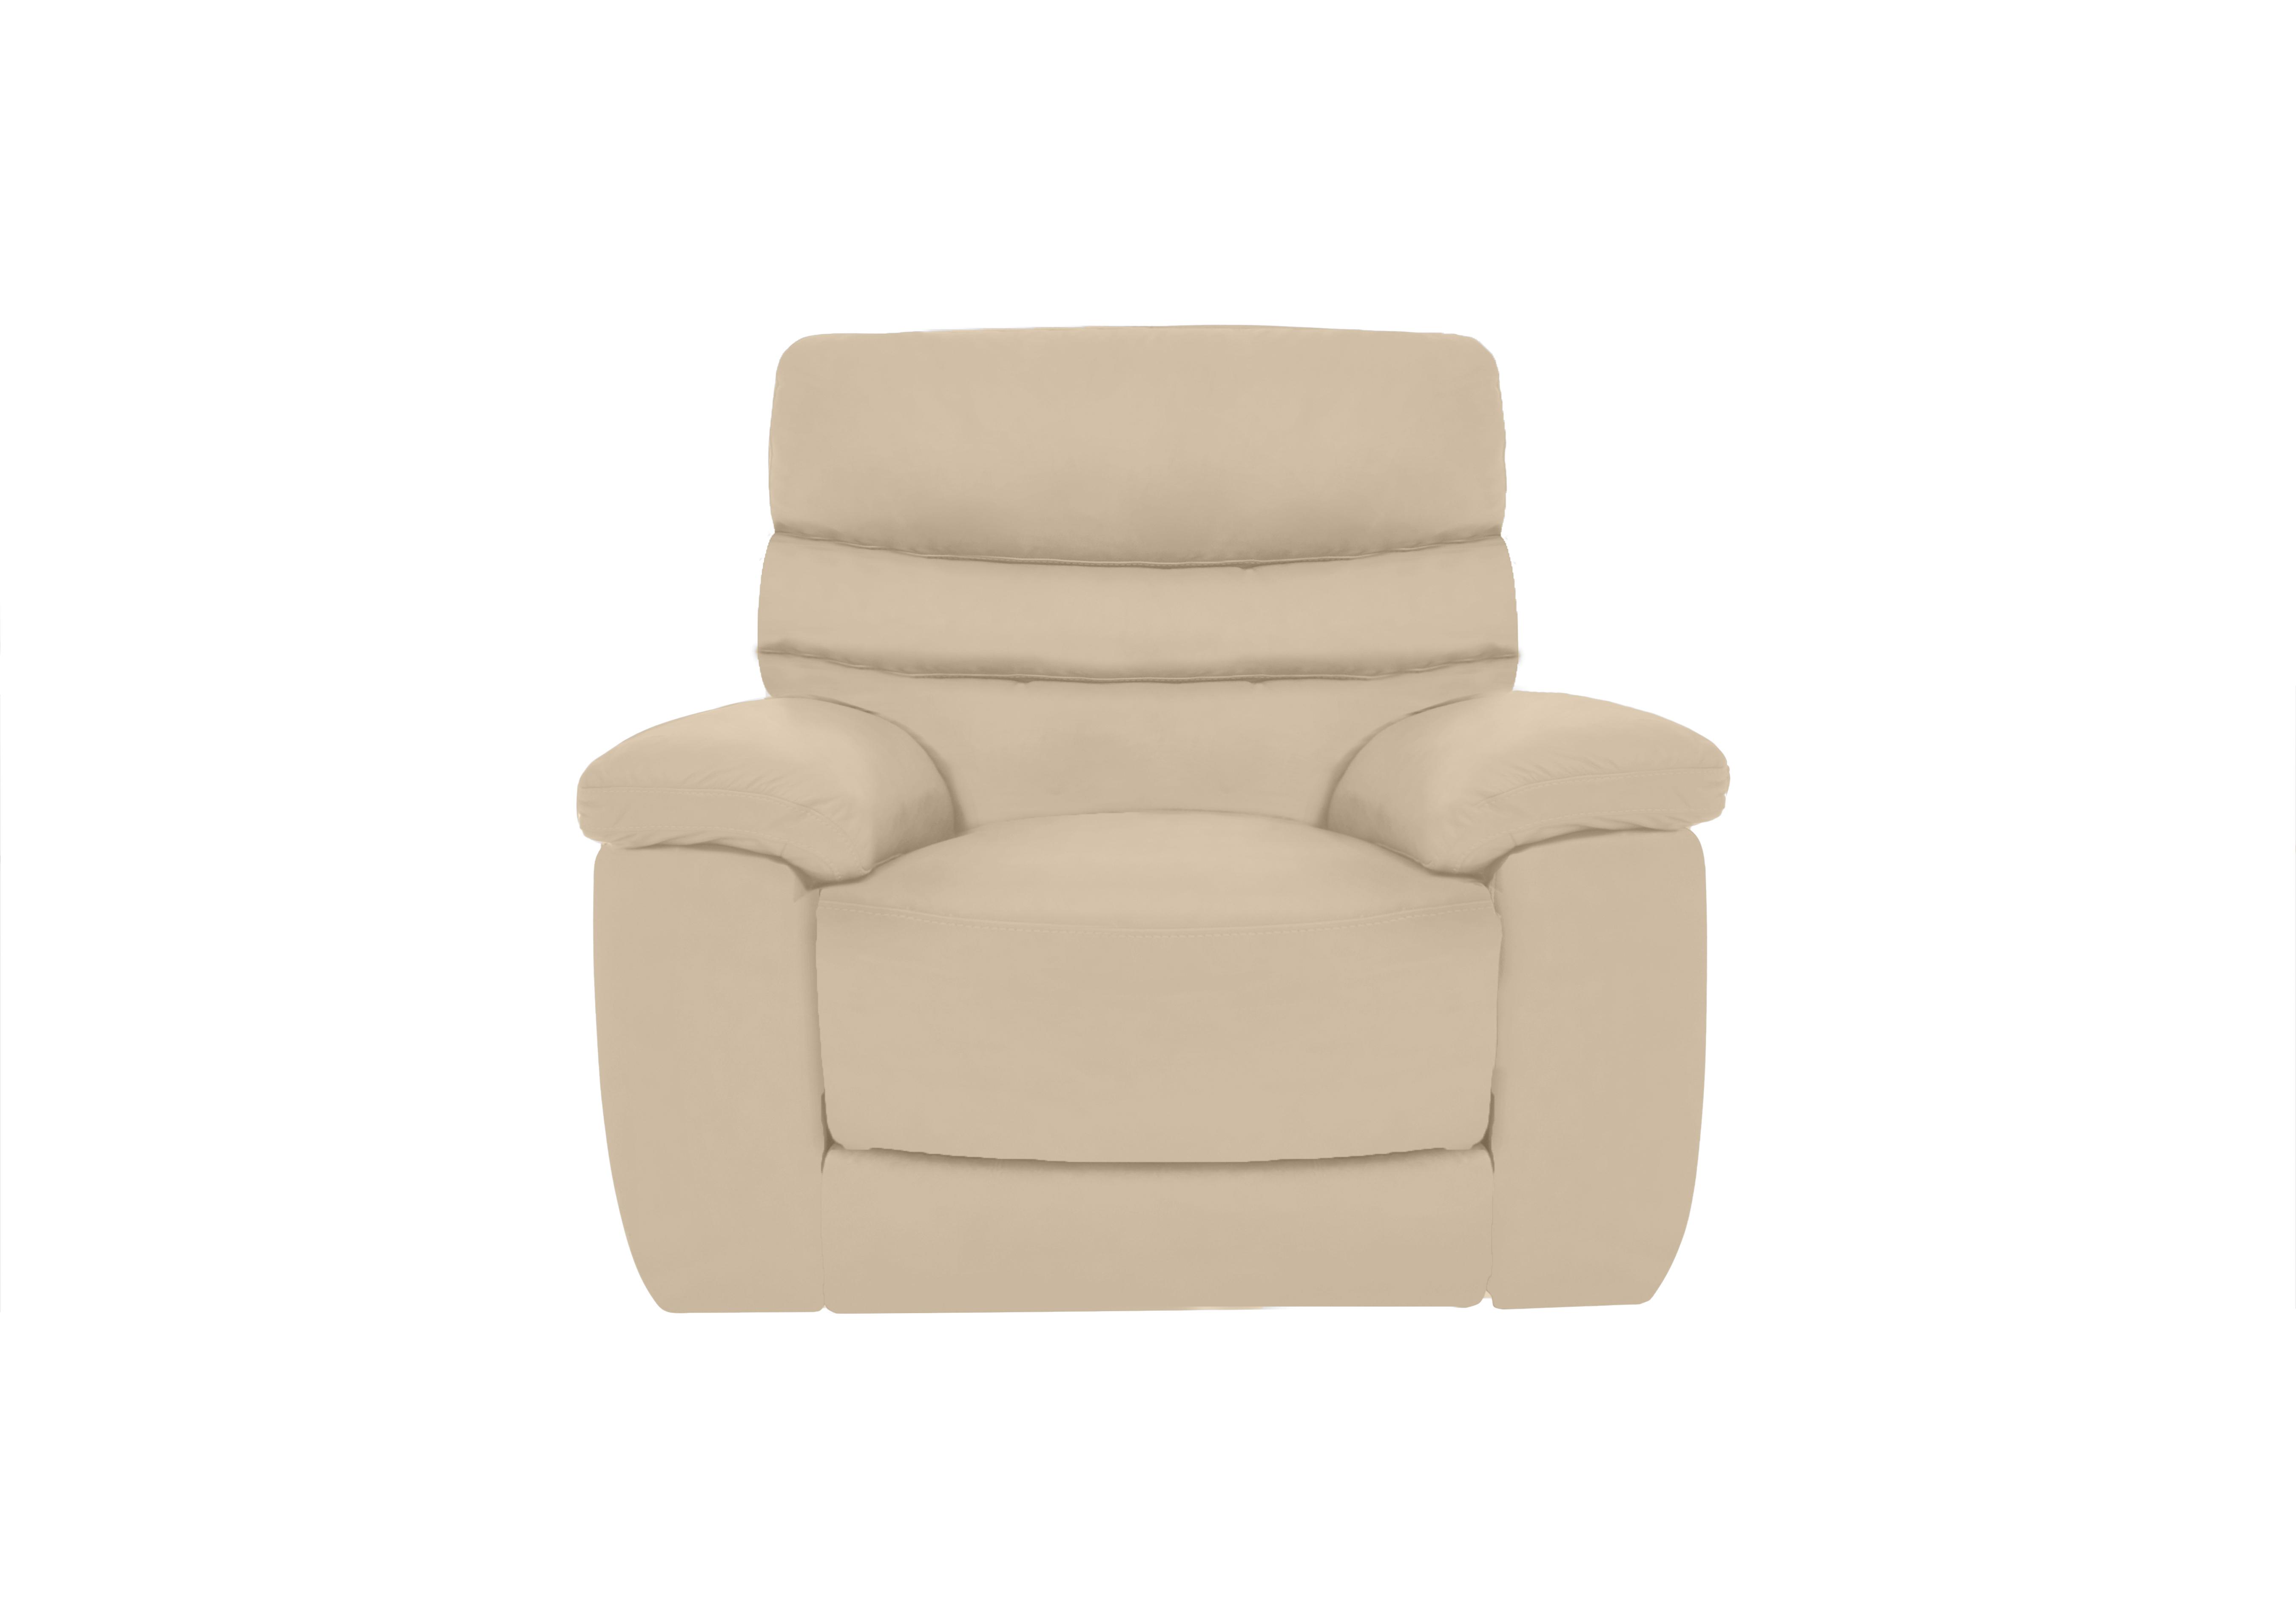 Nimbus Leather Chair in Bx-862c Bisque on Furniture Village